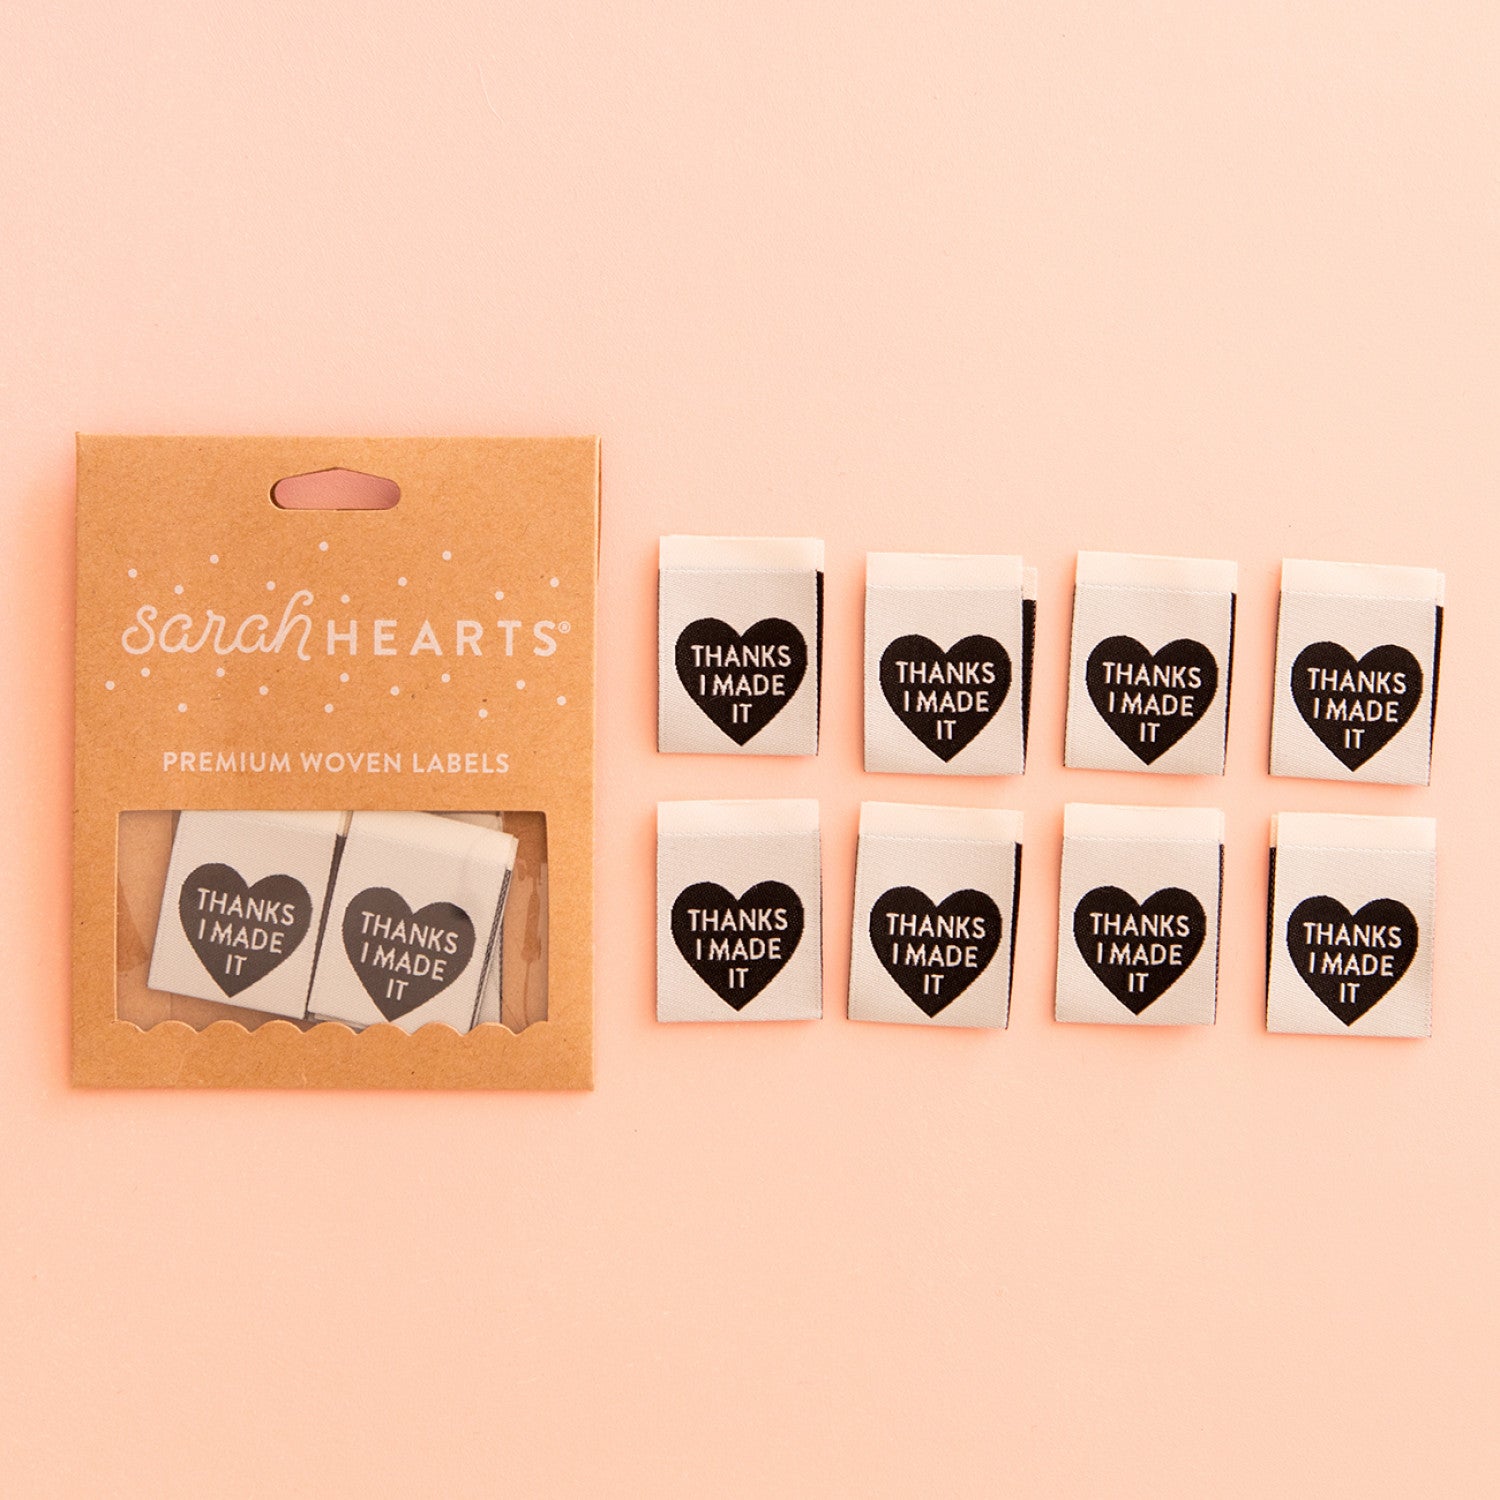 THANKS I MADE IT Premium Woven Heart Label 8-Pack from Sarah Hearts